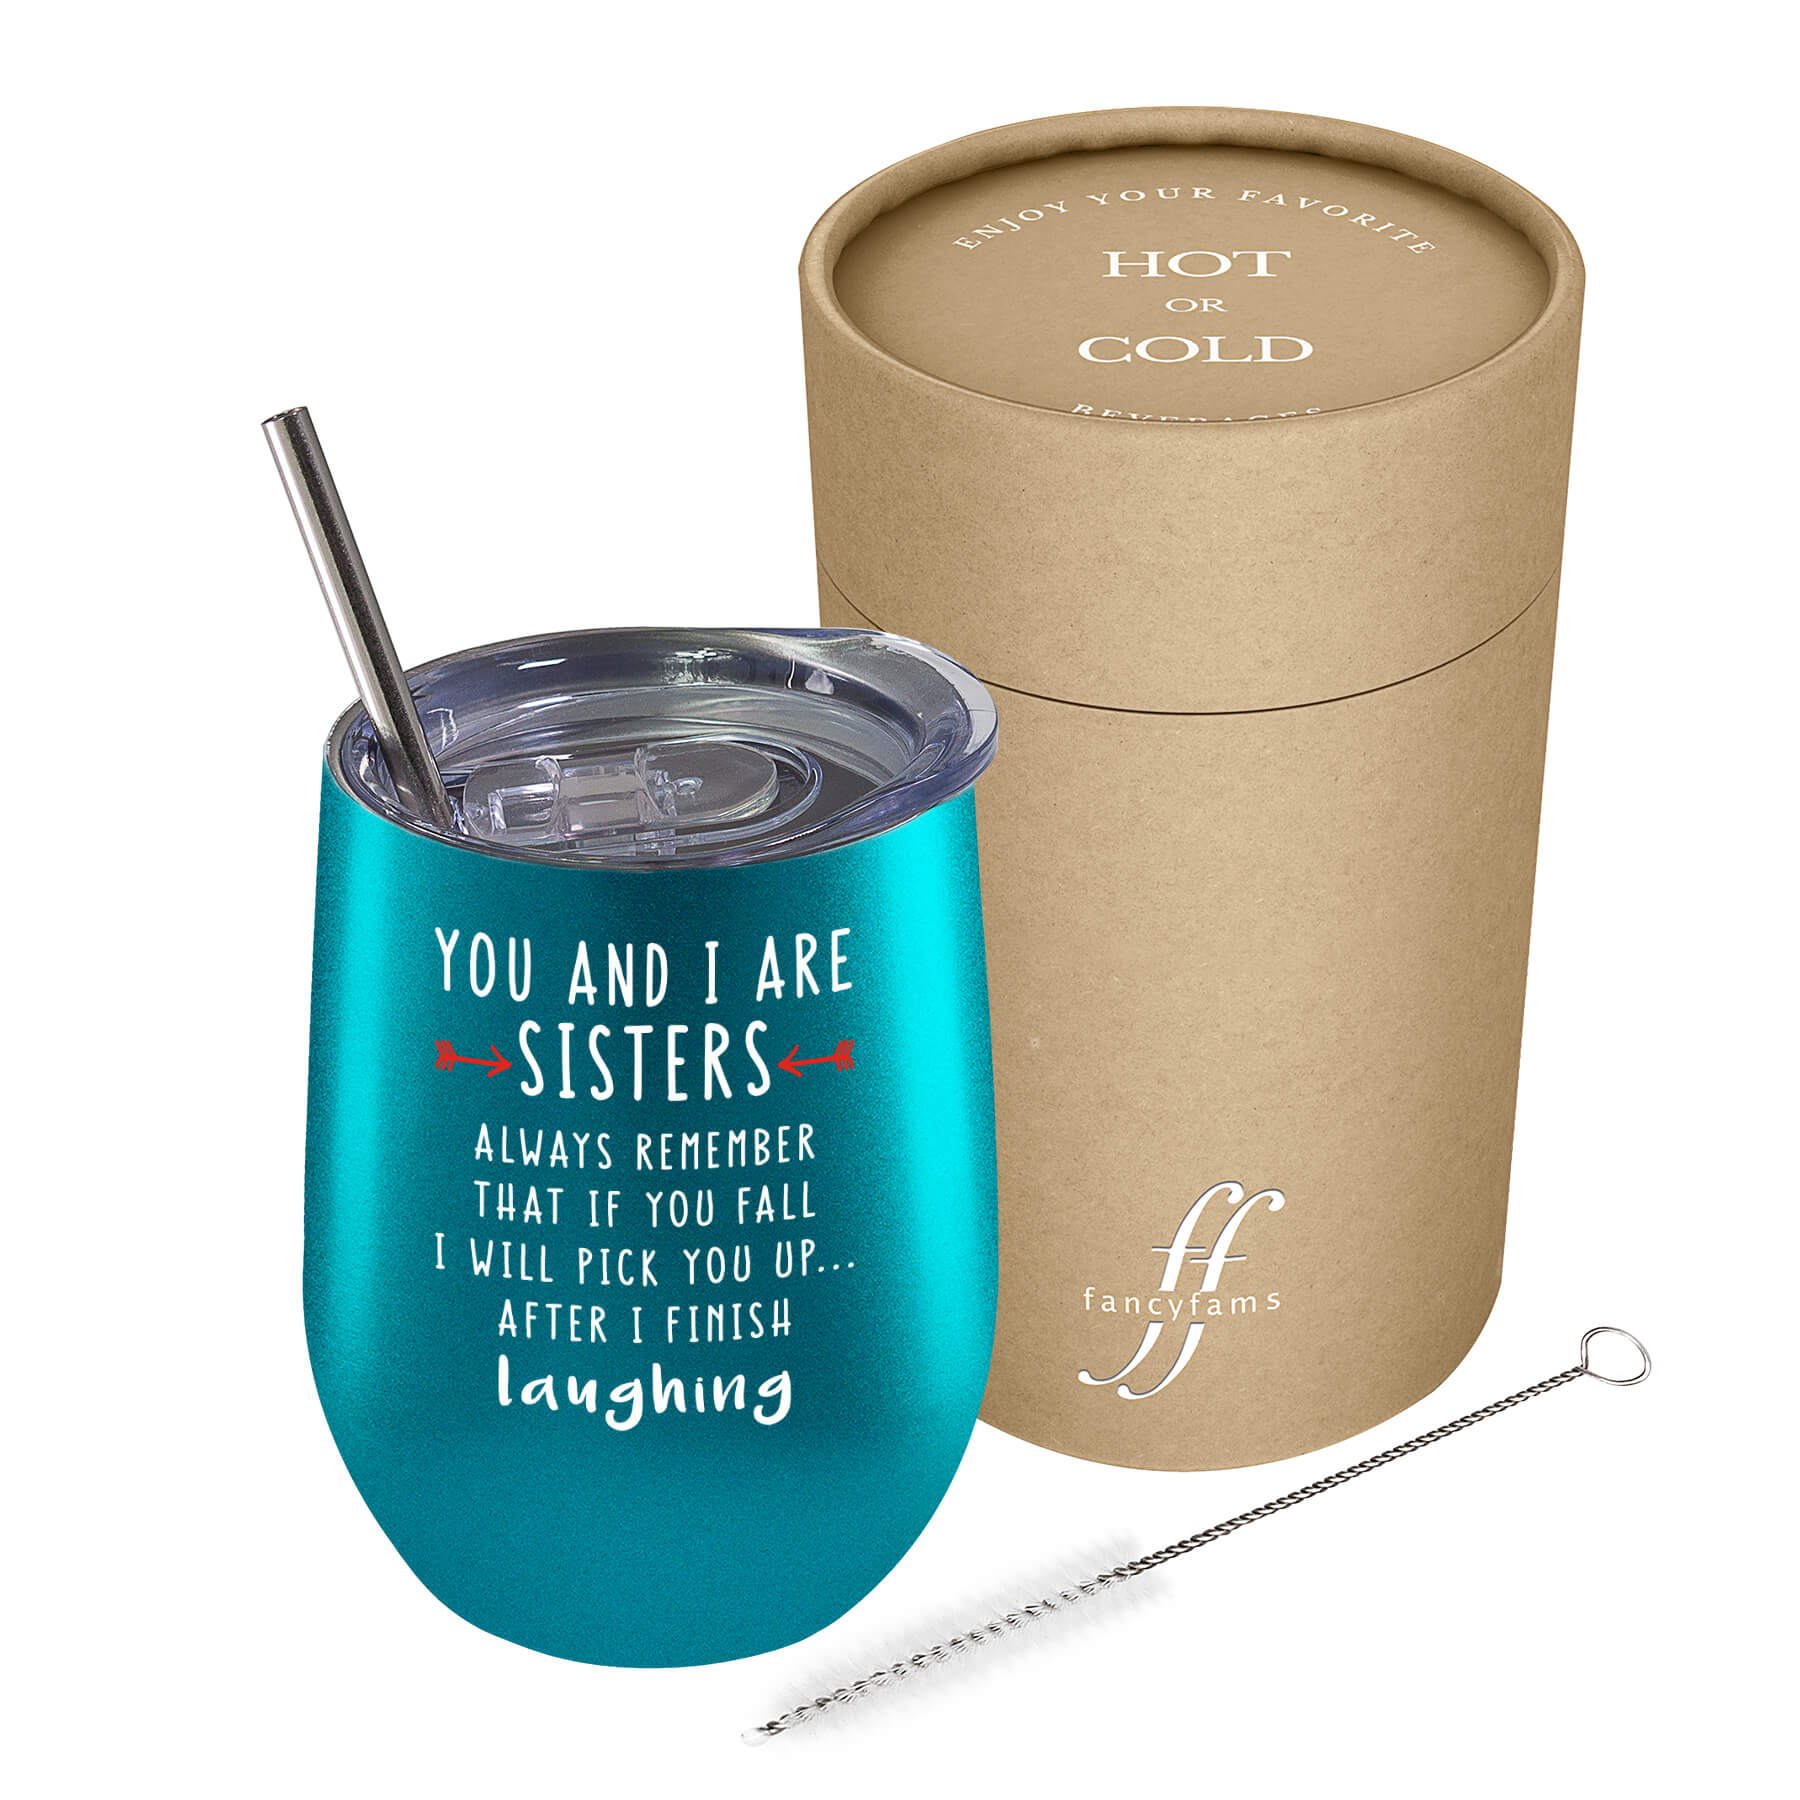 Sisterly Bond Tumbler: 'You and I Are Sisters' 12 oz Stainless Steel Cup from Sister - fancyfams